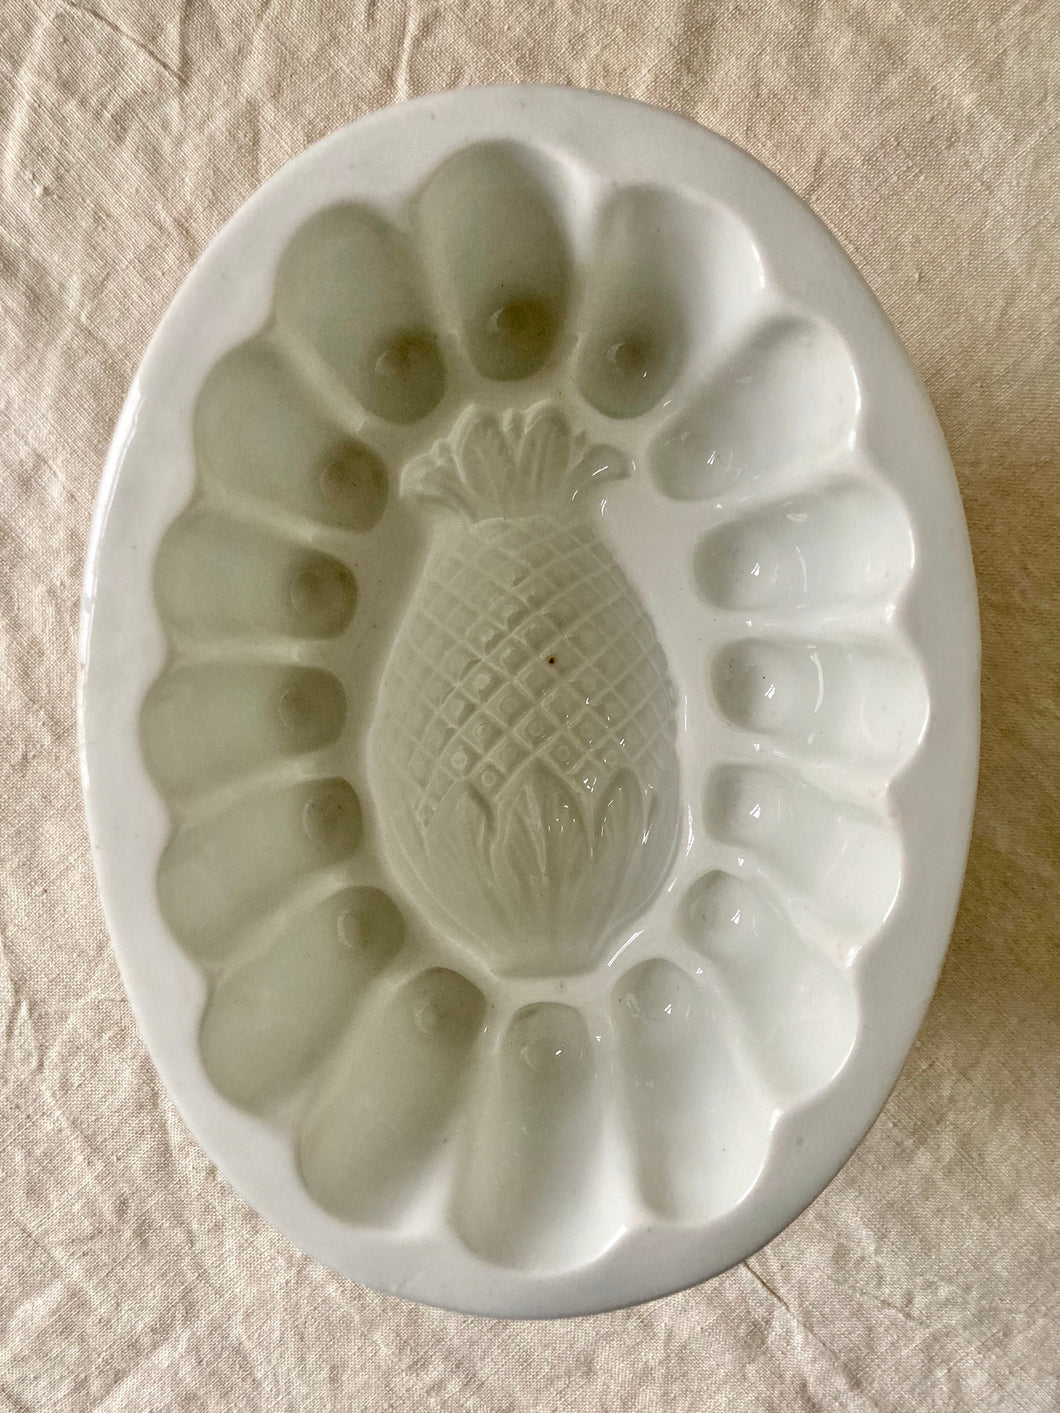 Rare antique Victorian Copeland pineapple shaped jelly mould